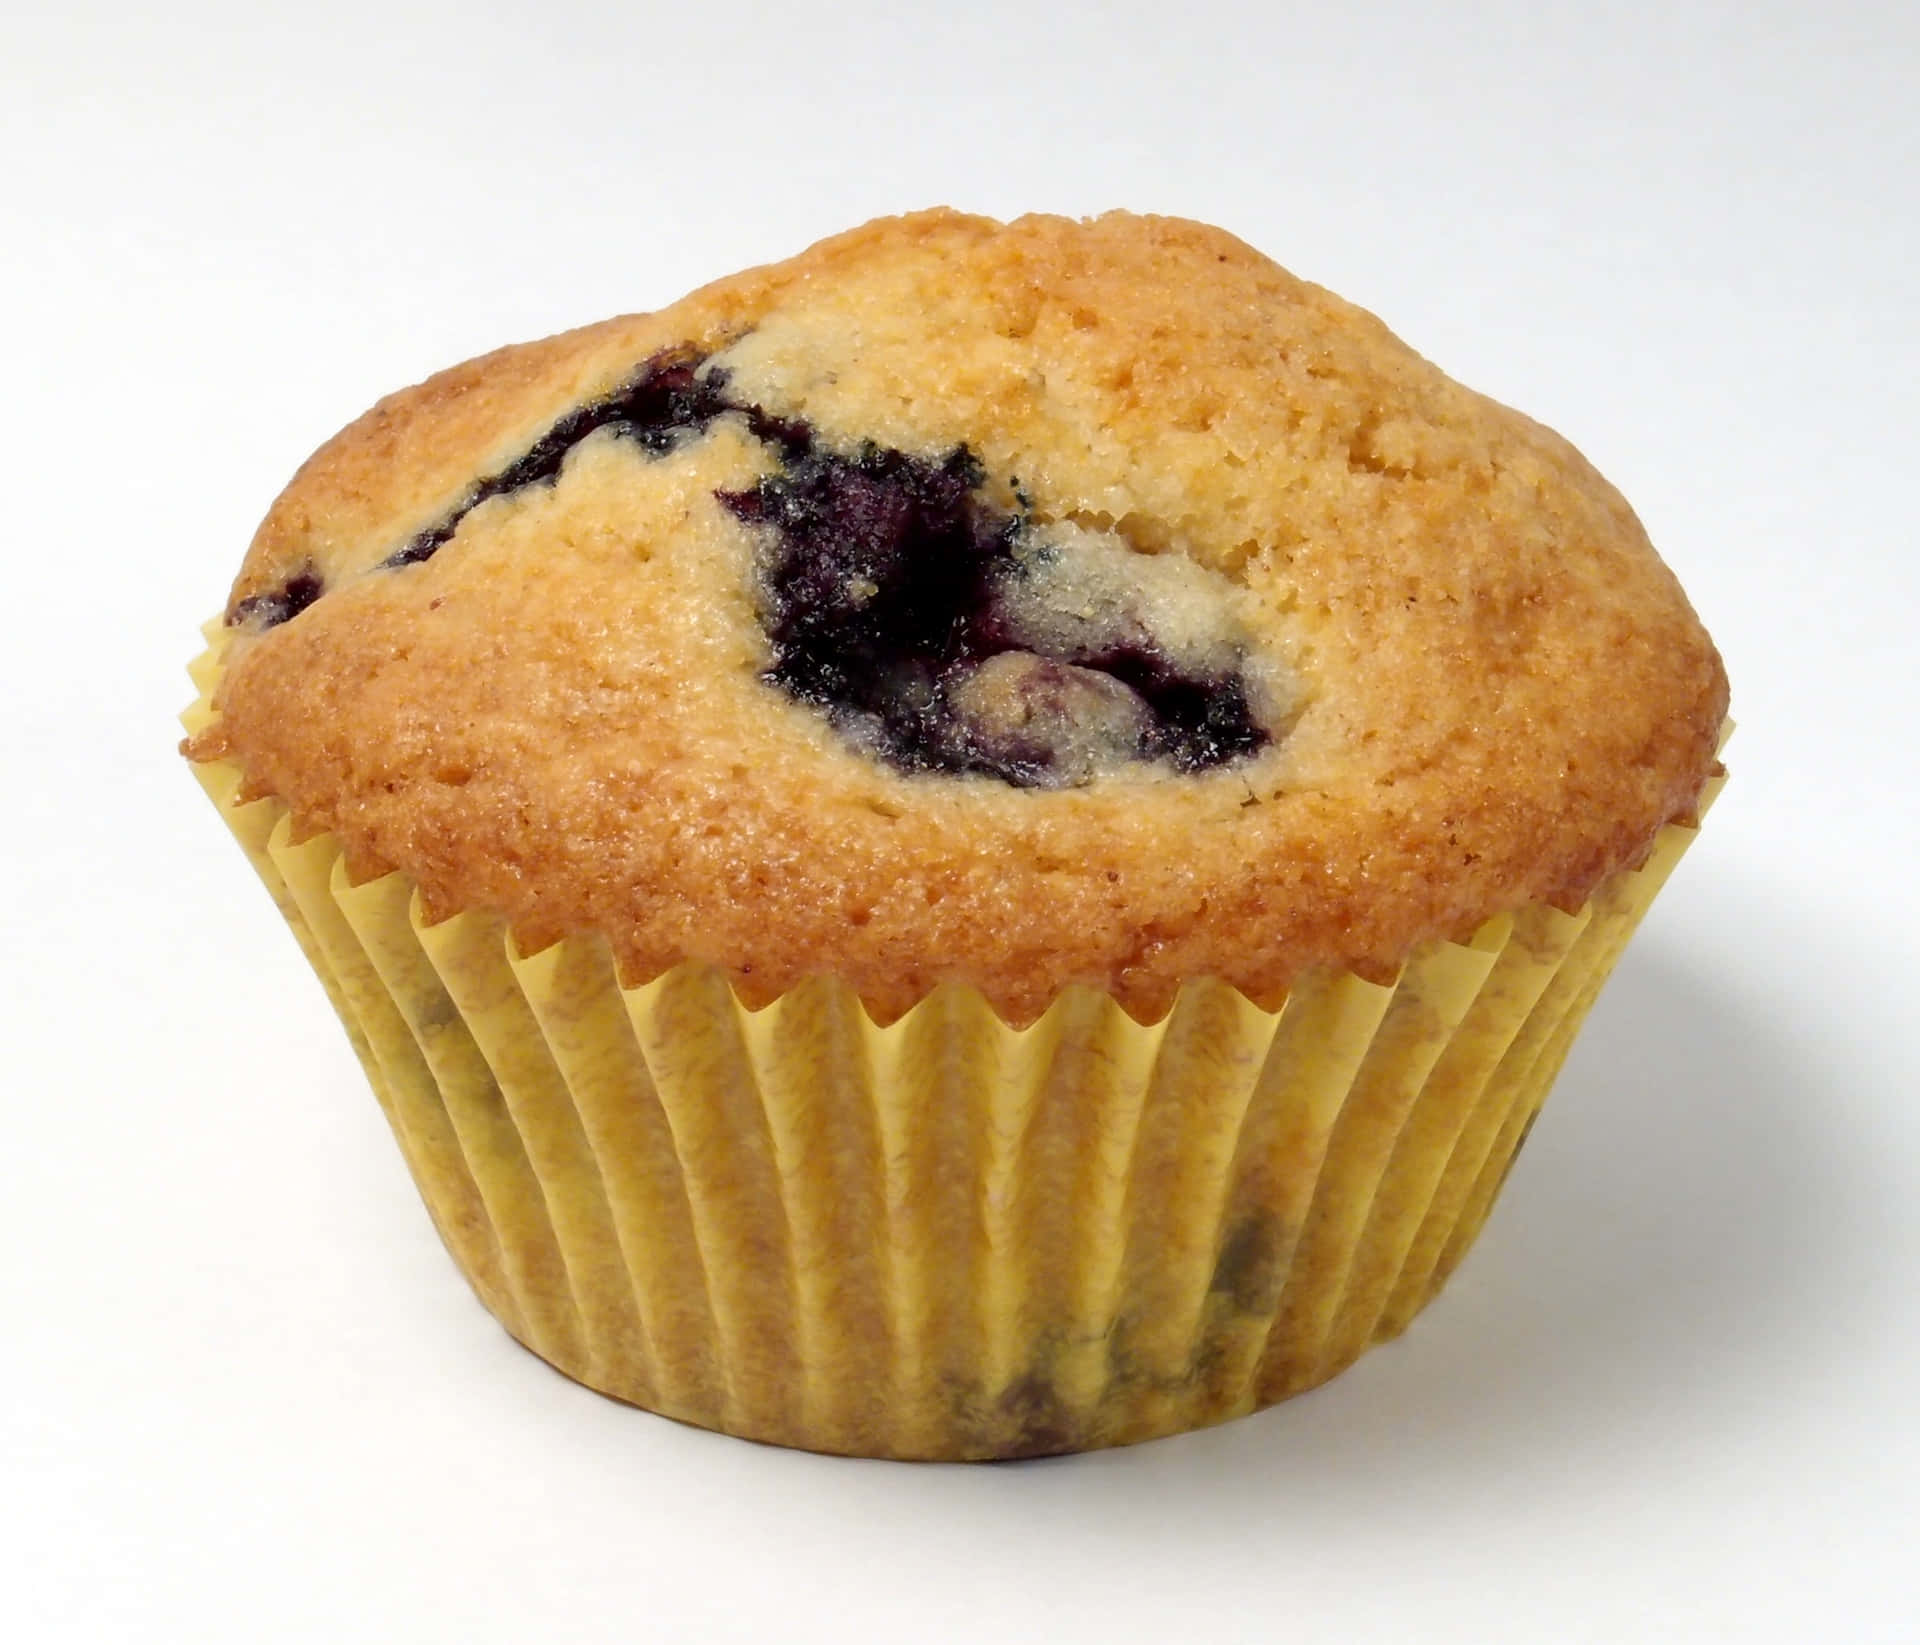 "Heavenly Blueberry Muffins" Wallpaper